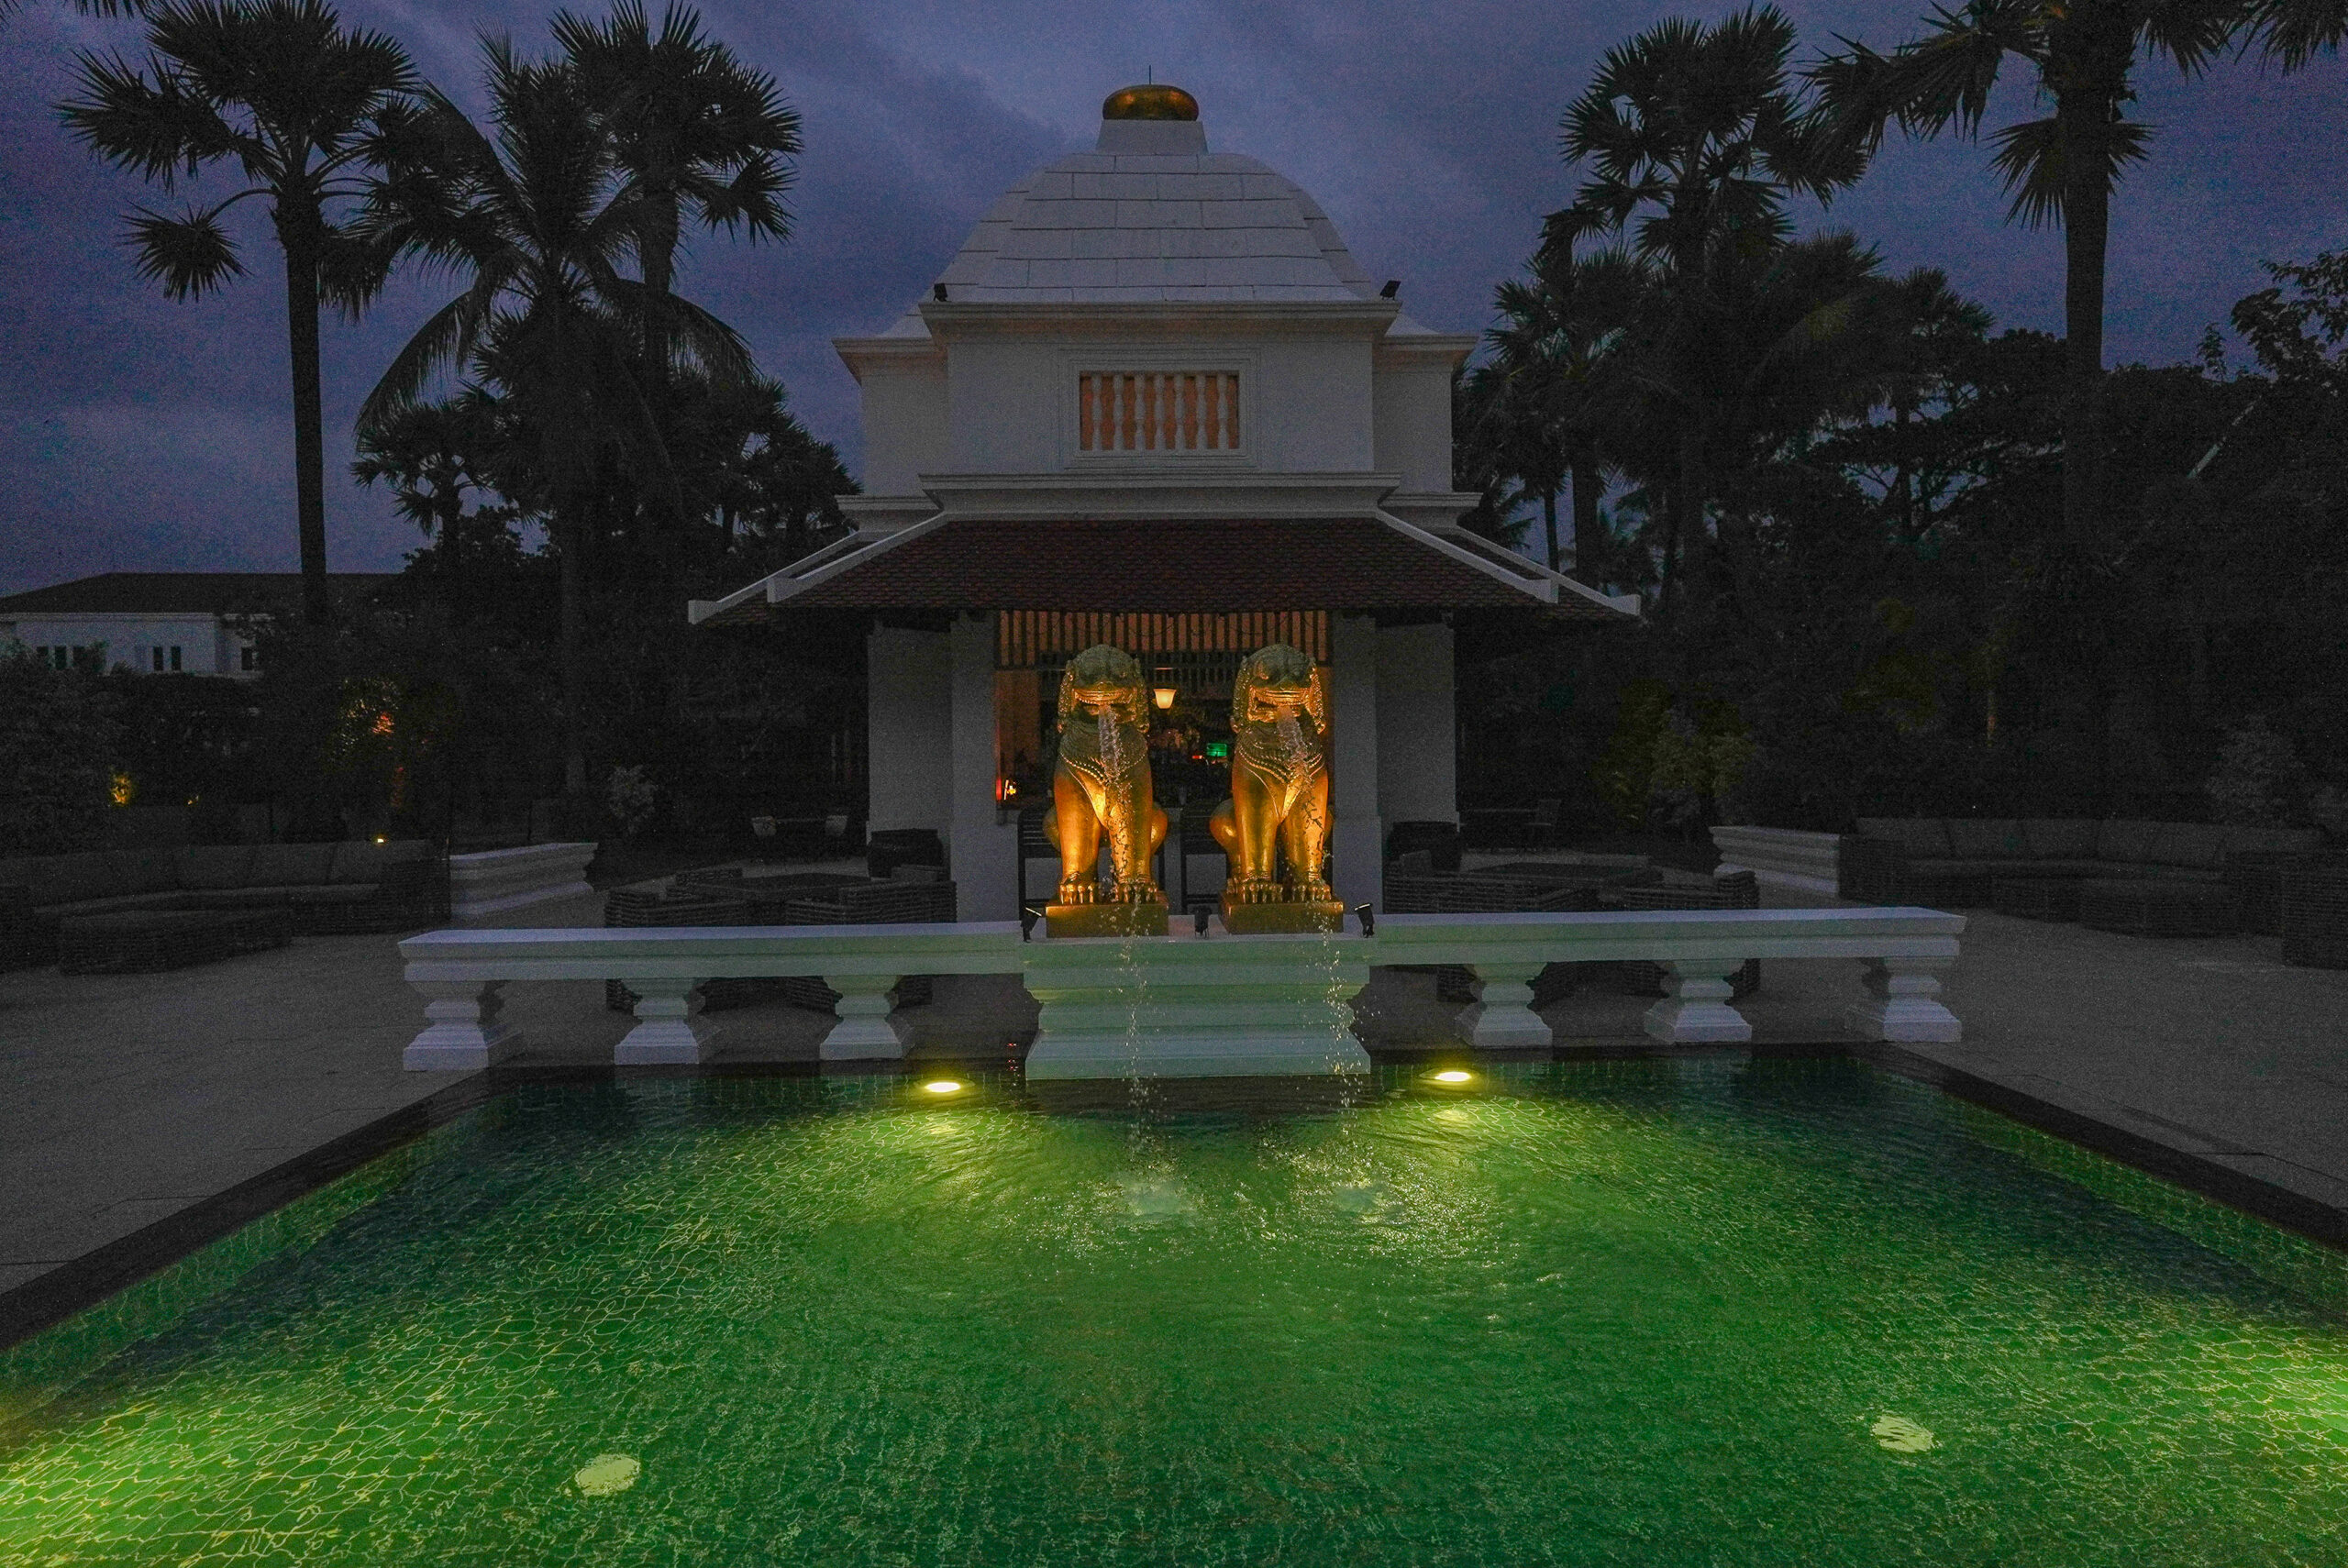 Raffles Grand Hotel D’Angkor; reminiscent of aristocratic luxury and service